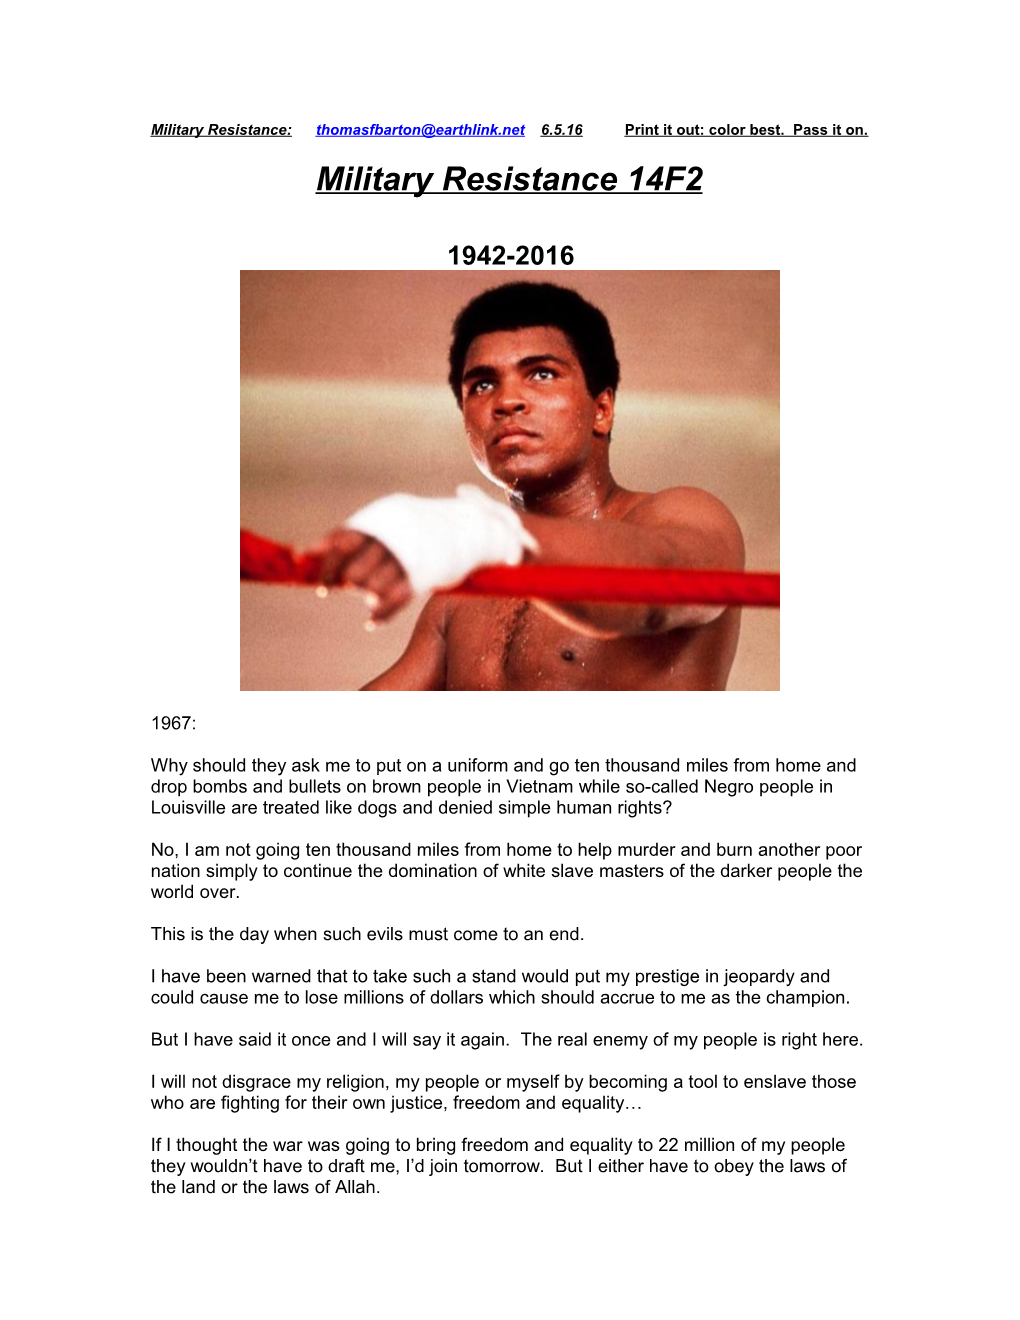 Military Resistance 14F2